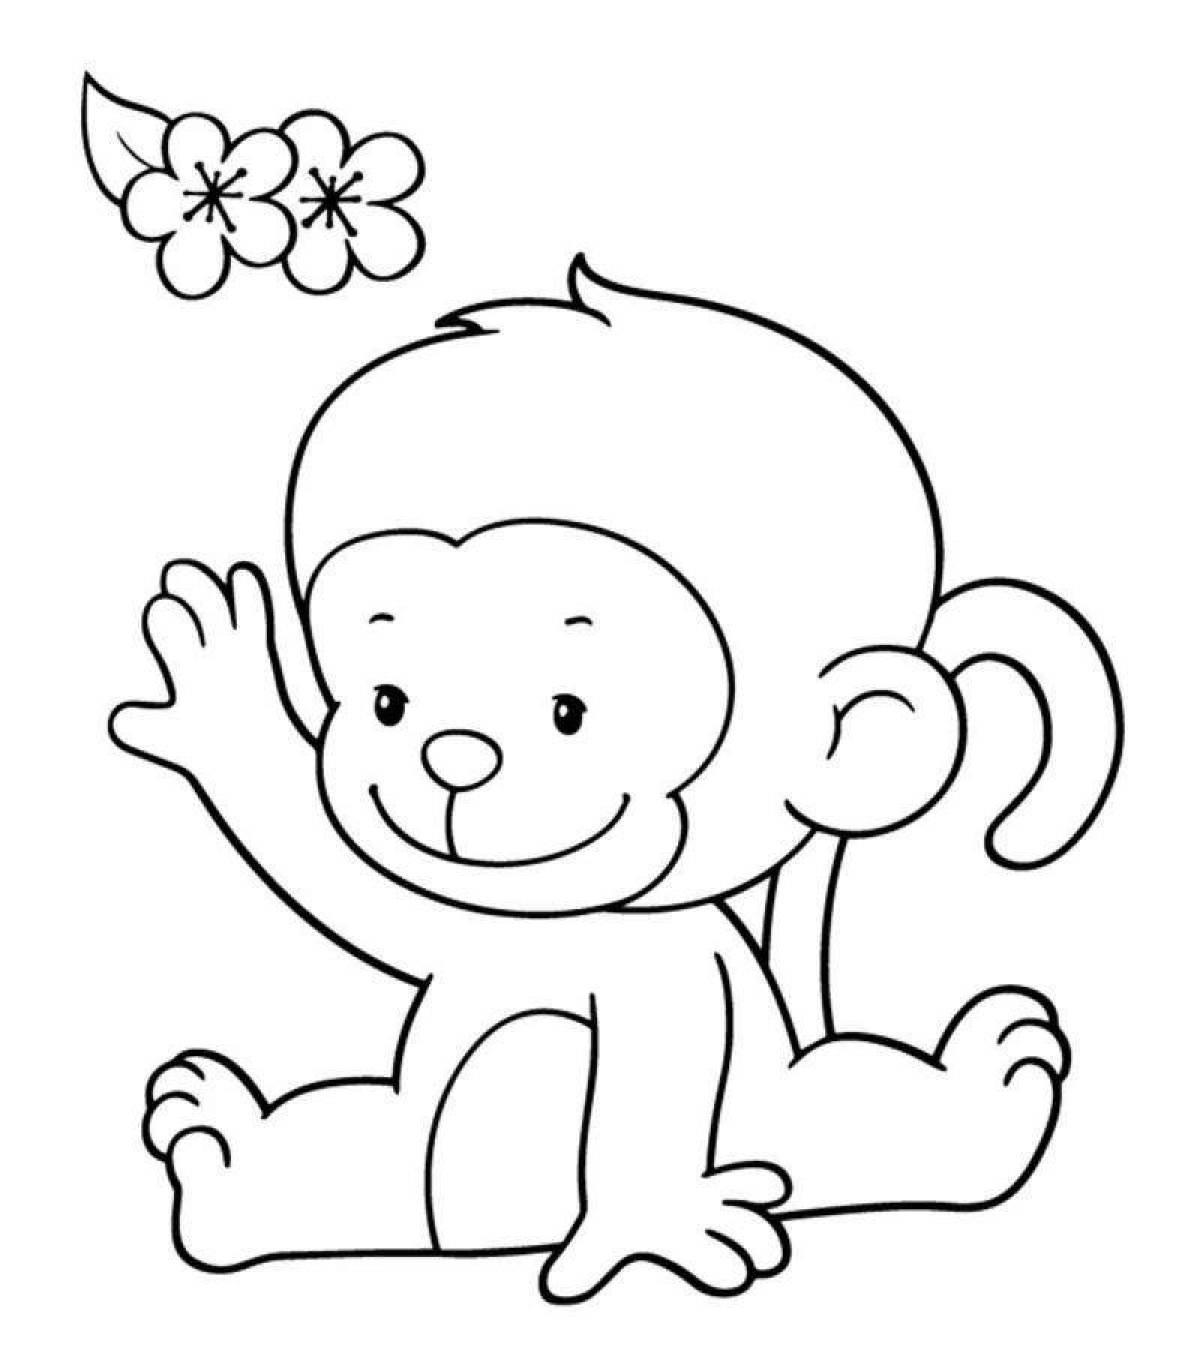 Bright coloring monkey for kids